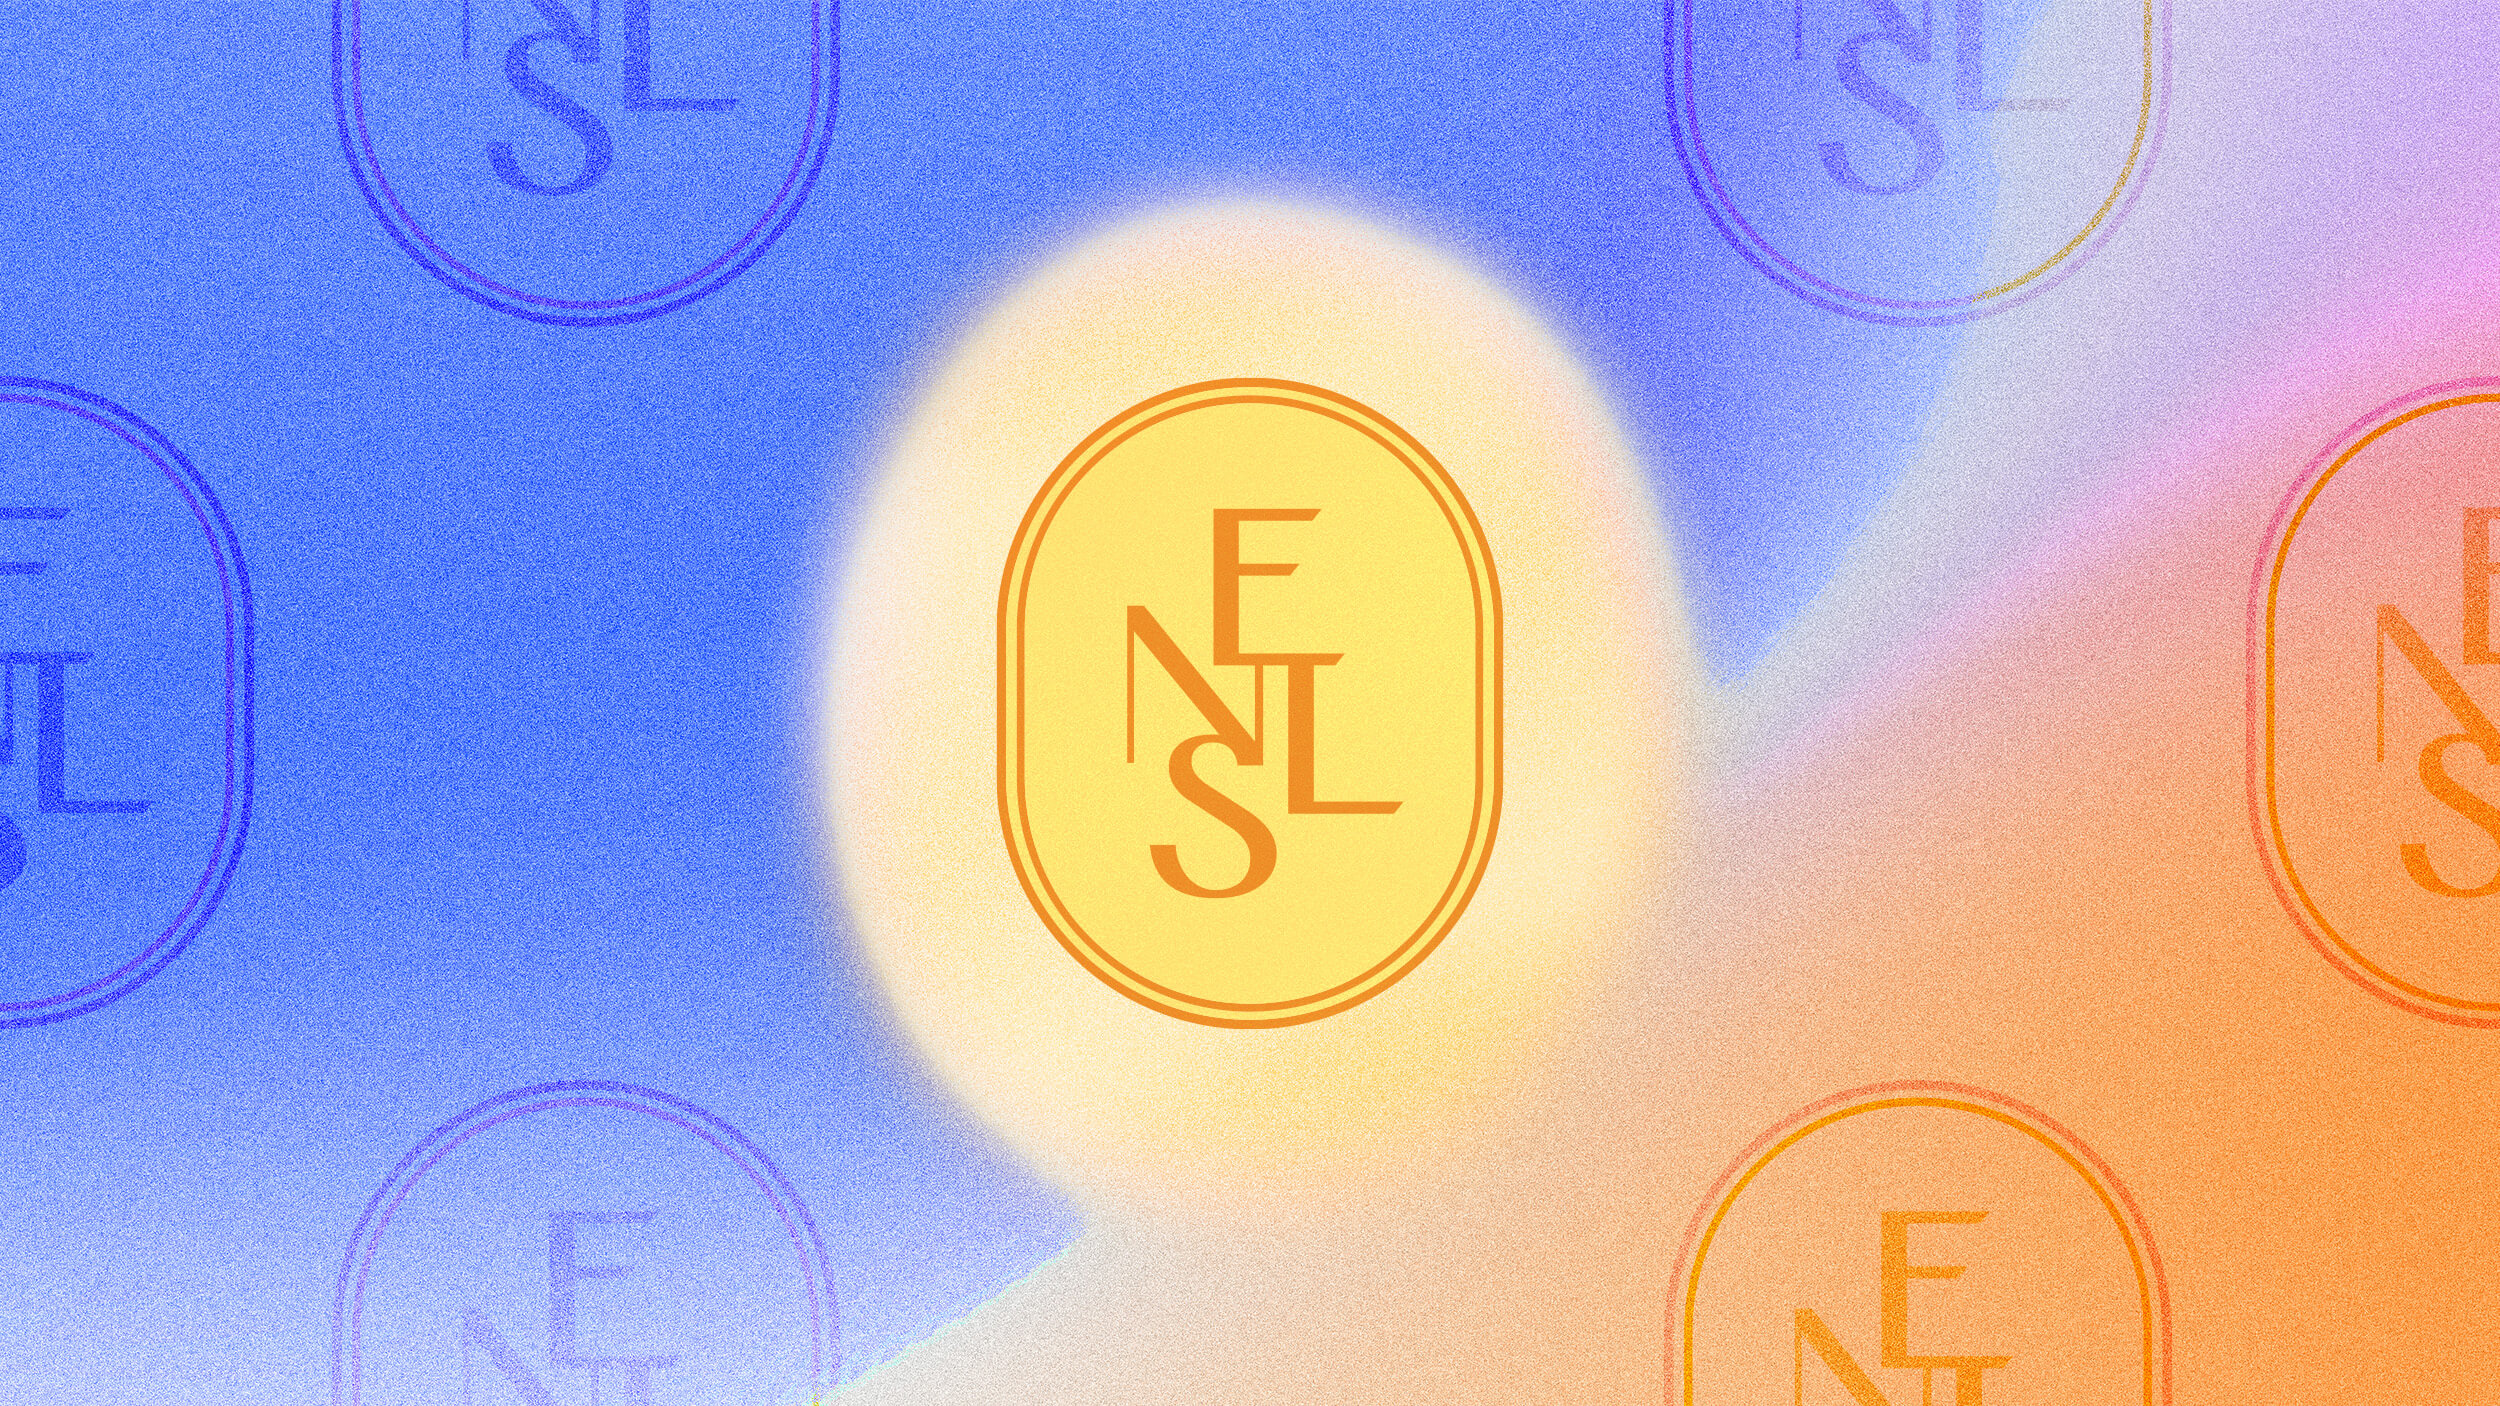 Oval Eneles logo badge repeated in a pattern on a gradient background